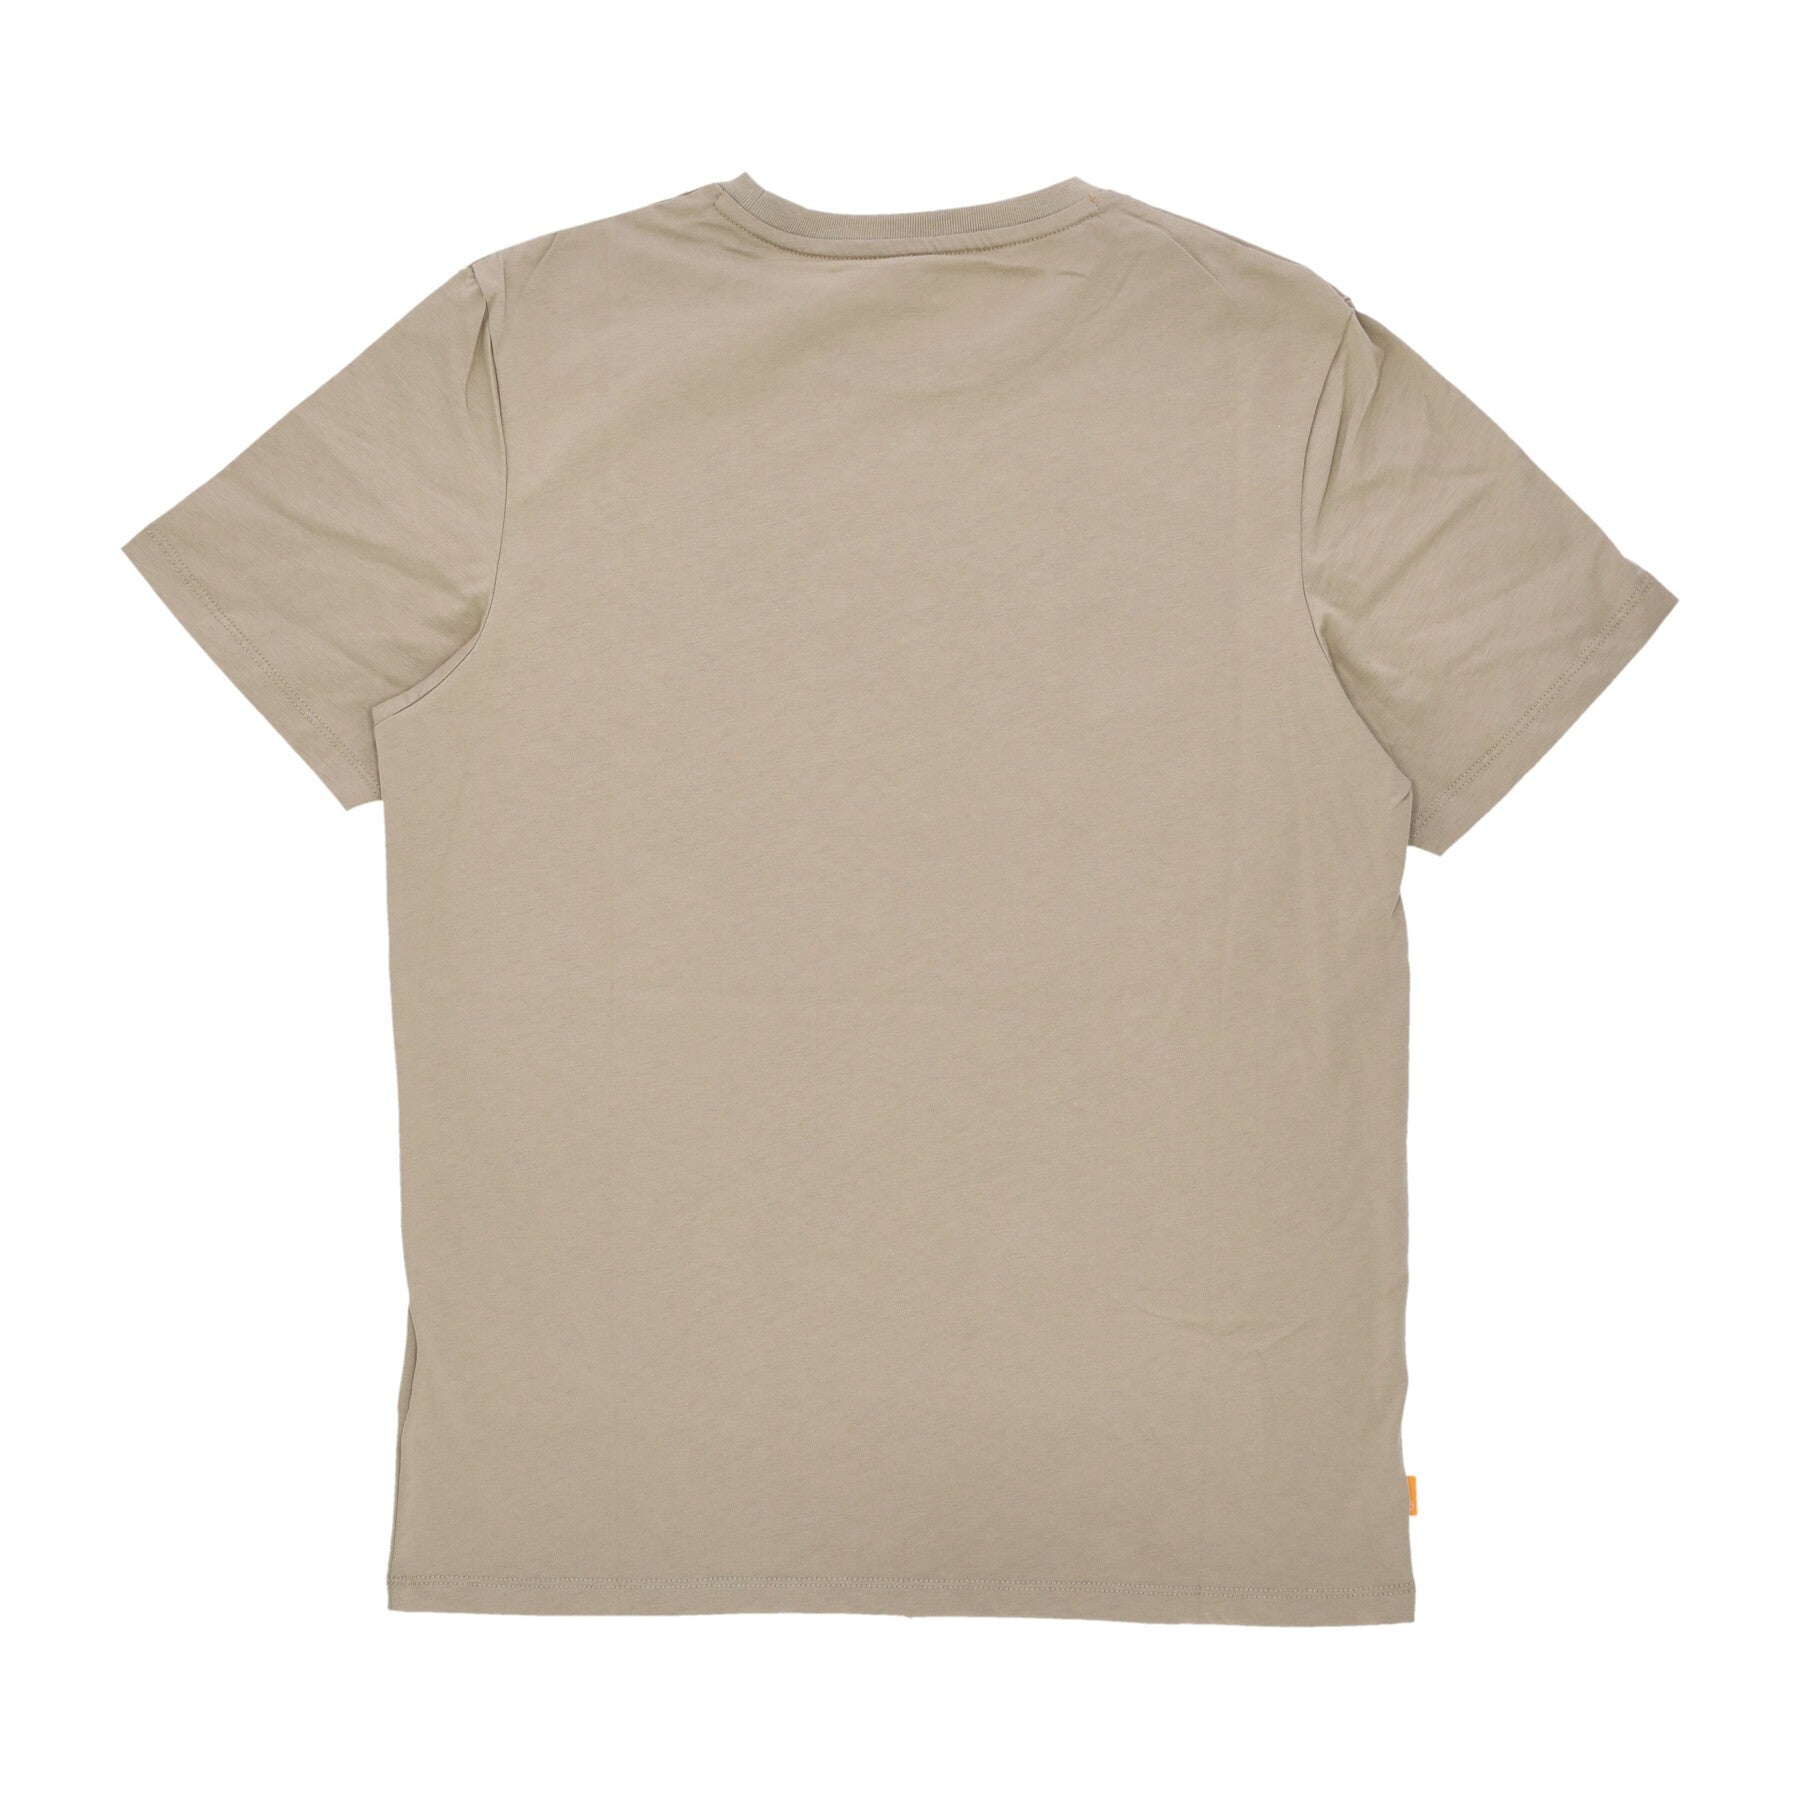 Timberland, Maglietta Uomo Wwes Front Tee, 